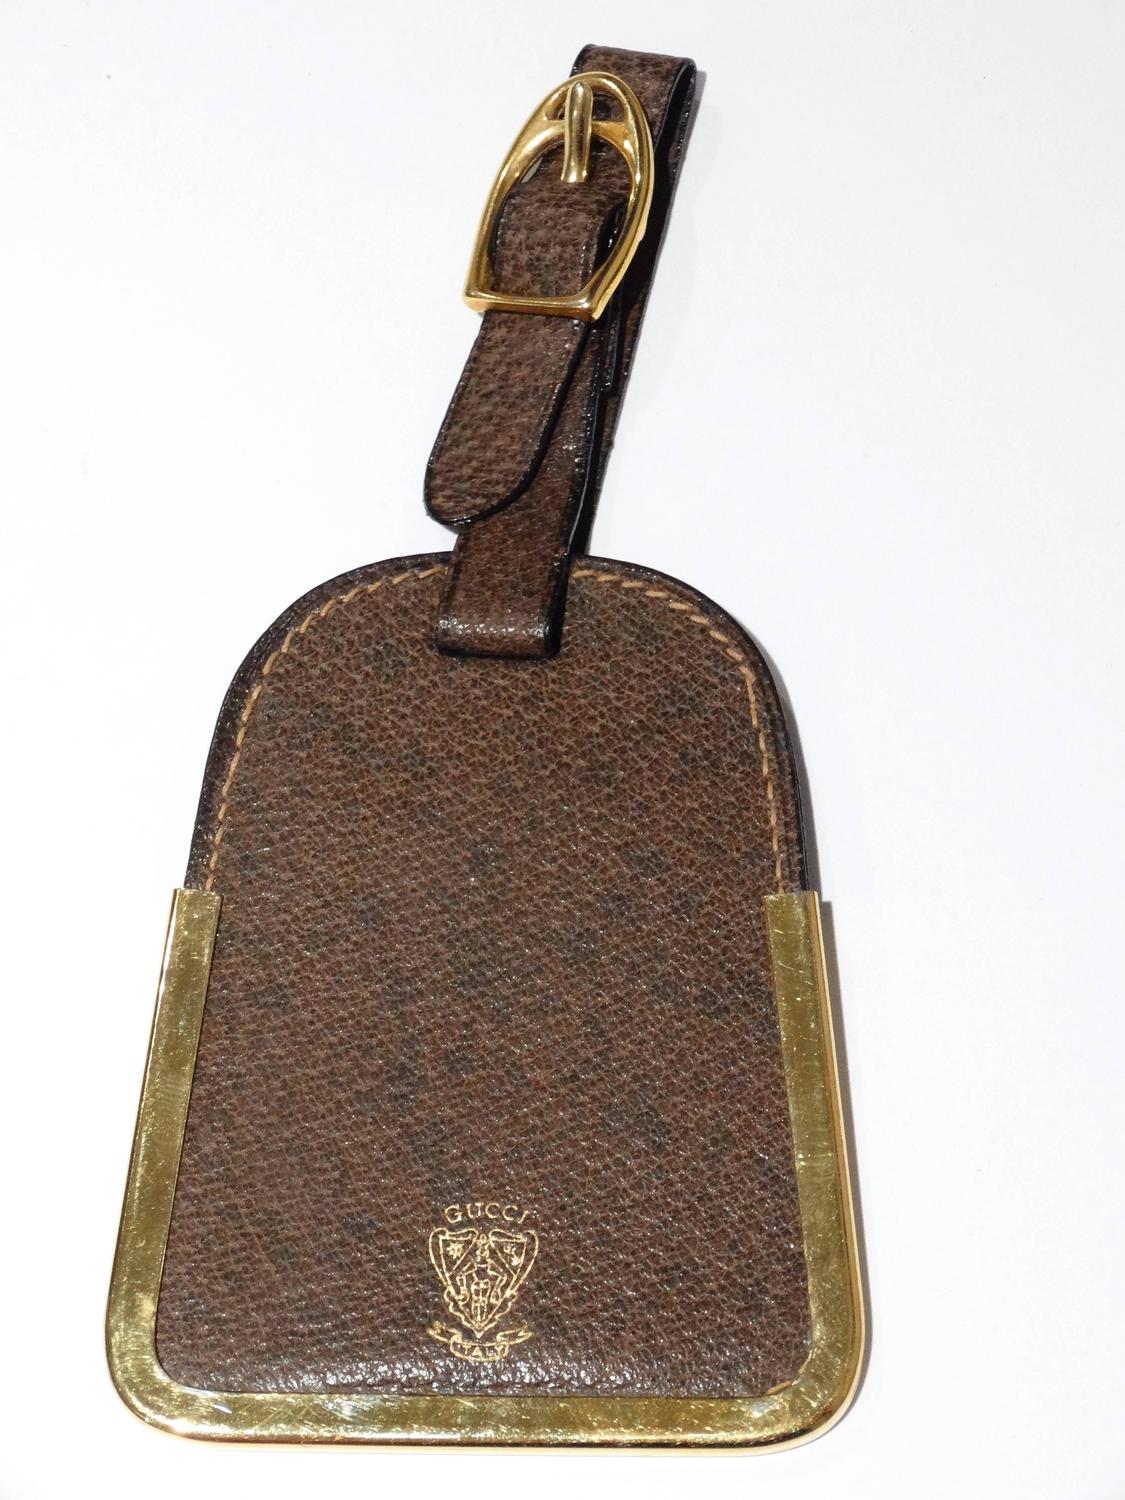 RARE 1970s Gucci Leather Luggage Tag For Sale at 1stdibs